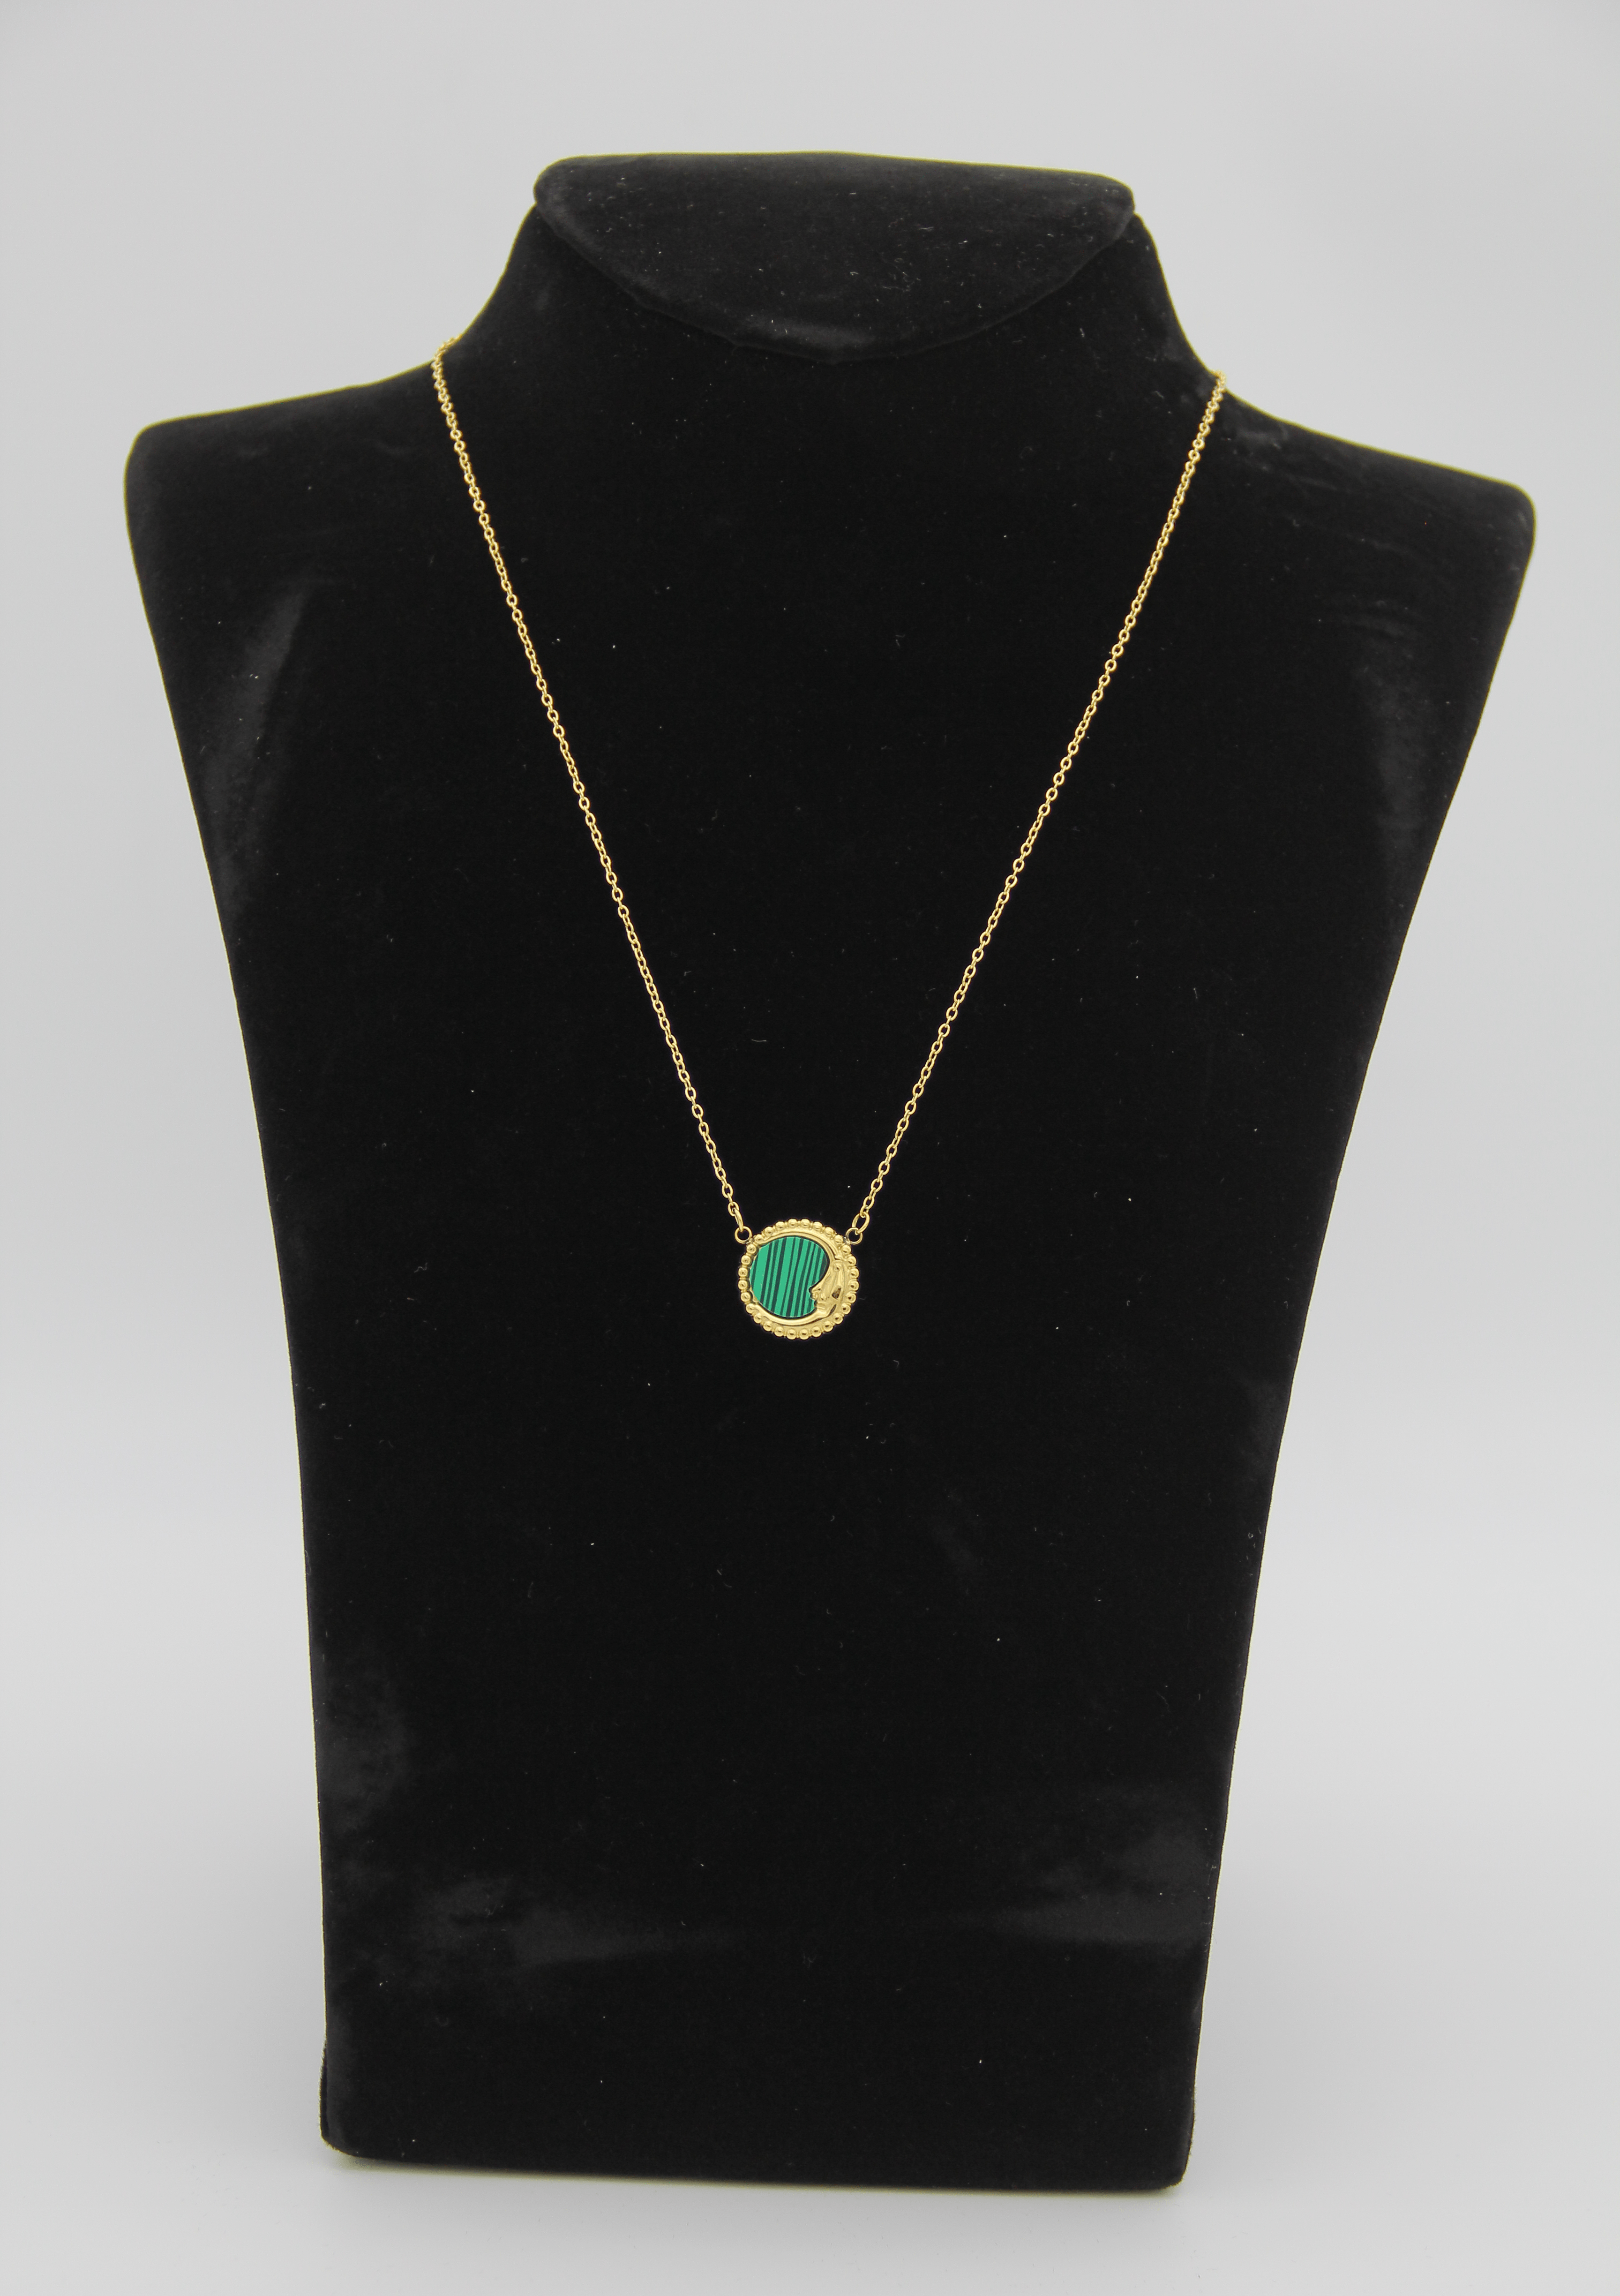 Outlet W&B Female Necklaces Short - Green & Gold Pendant Necklace